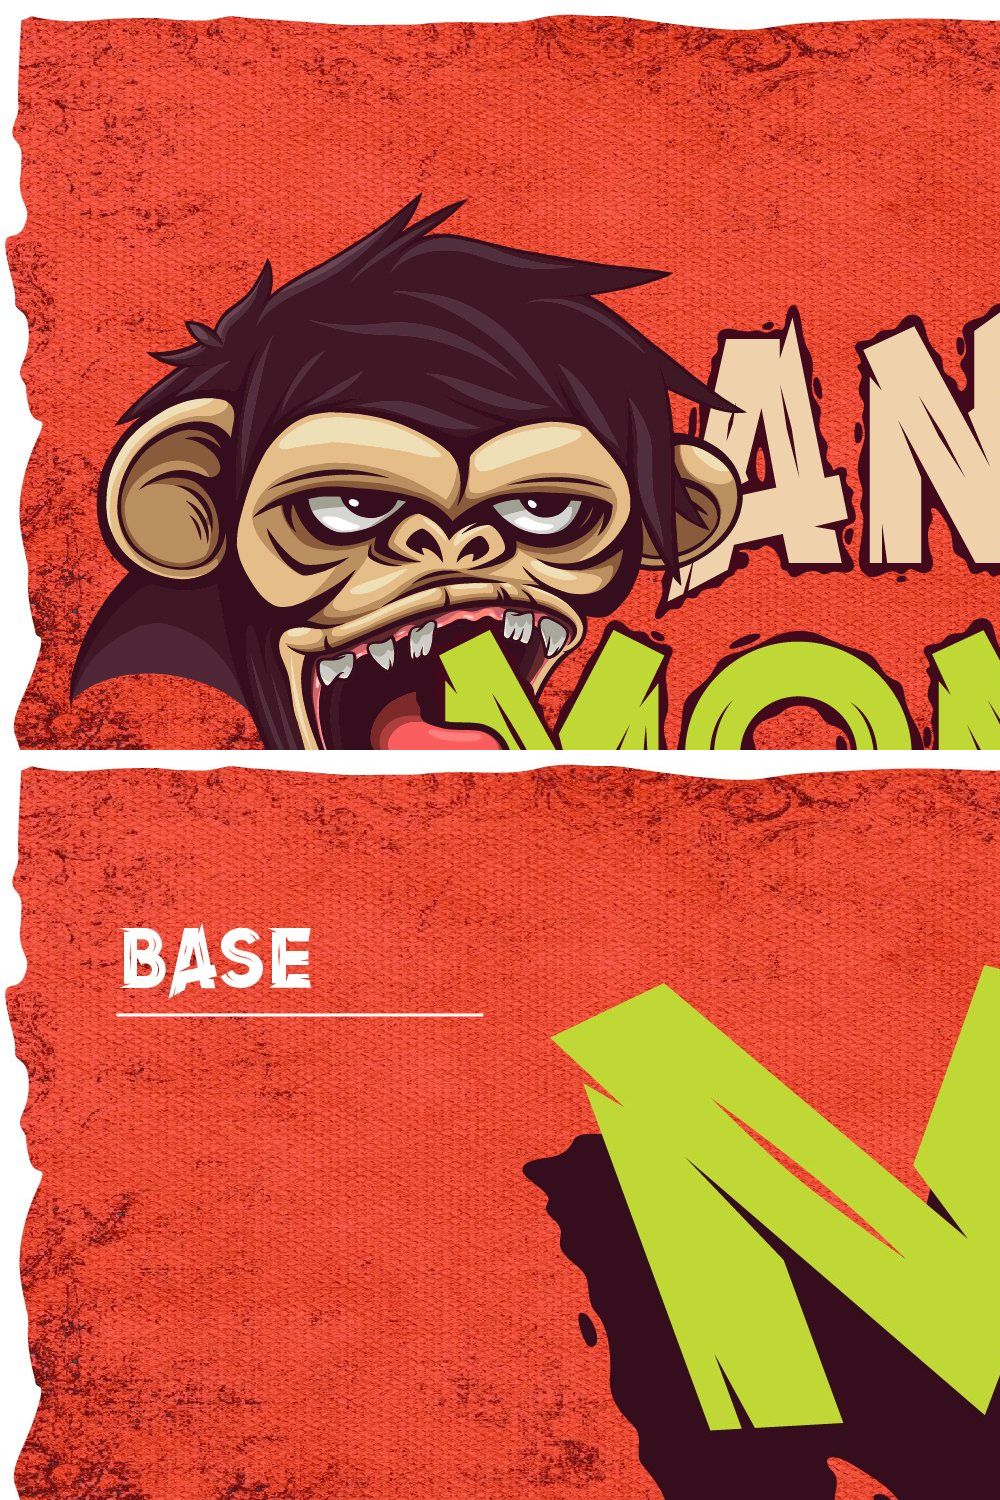 Angry Monkey pinterest preview image.